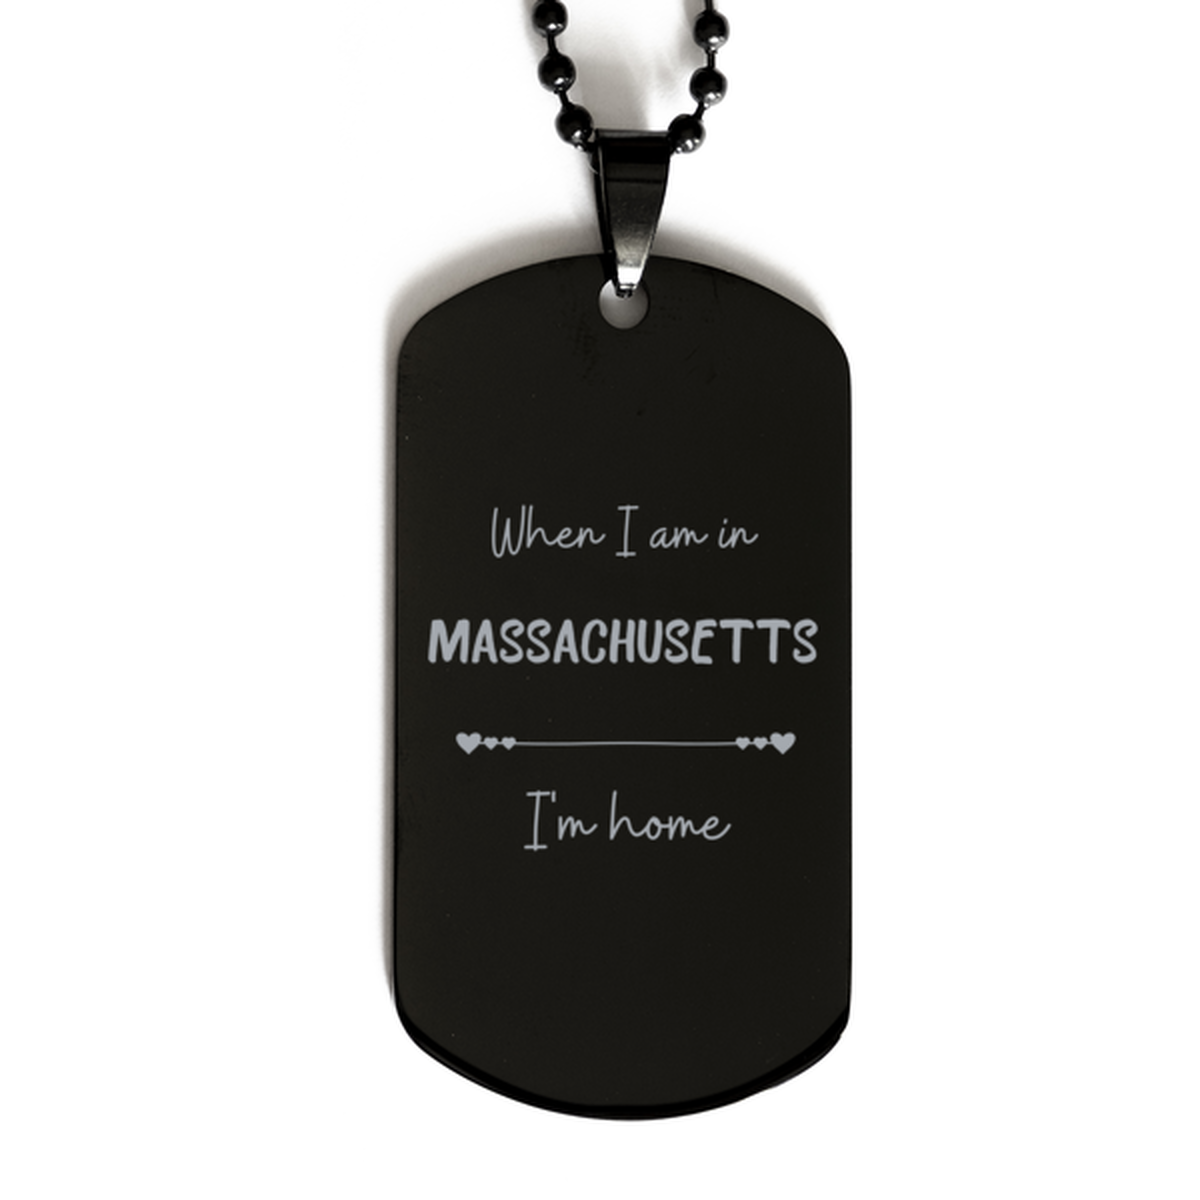 When I am in Massachusetts I'm home Black Dog Tag, Cheap Gifts For Massachusetts, State Massachusetts Birthday Gifts for Friends Coworker